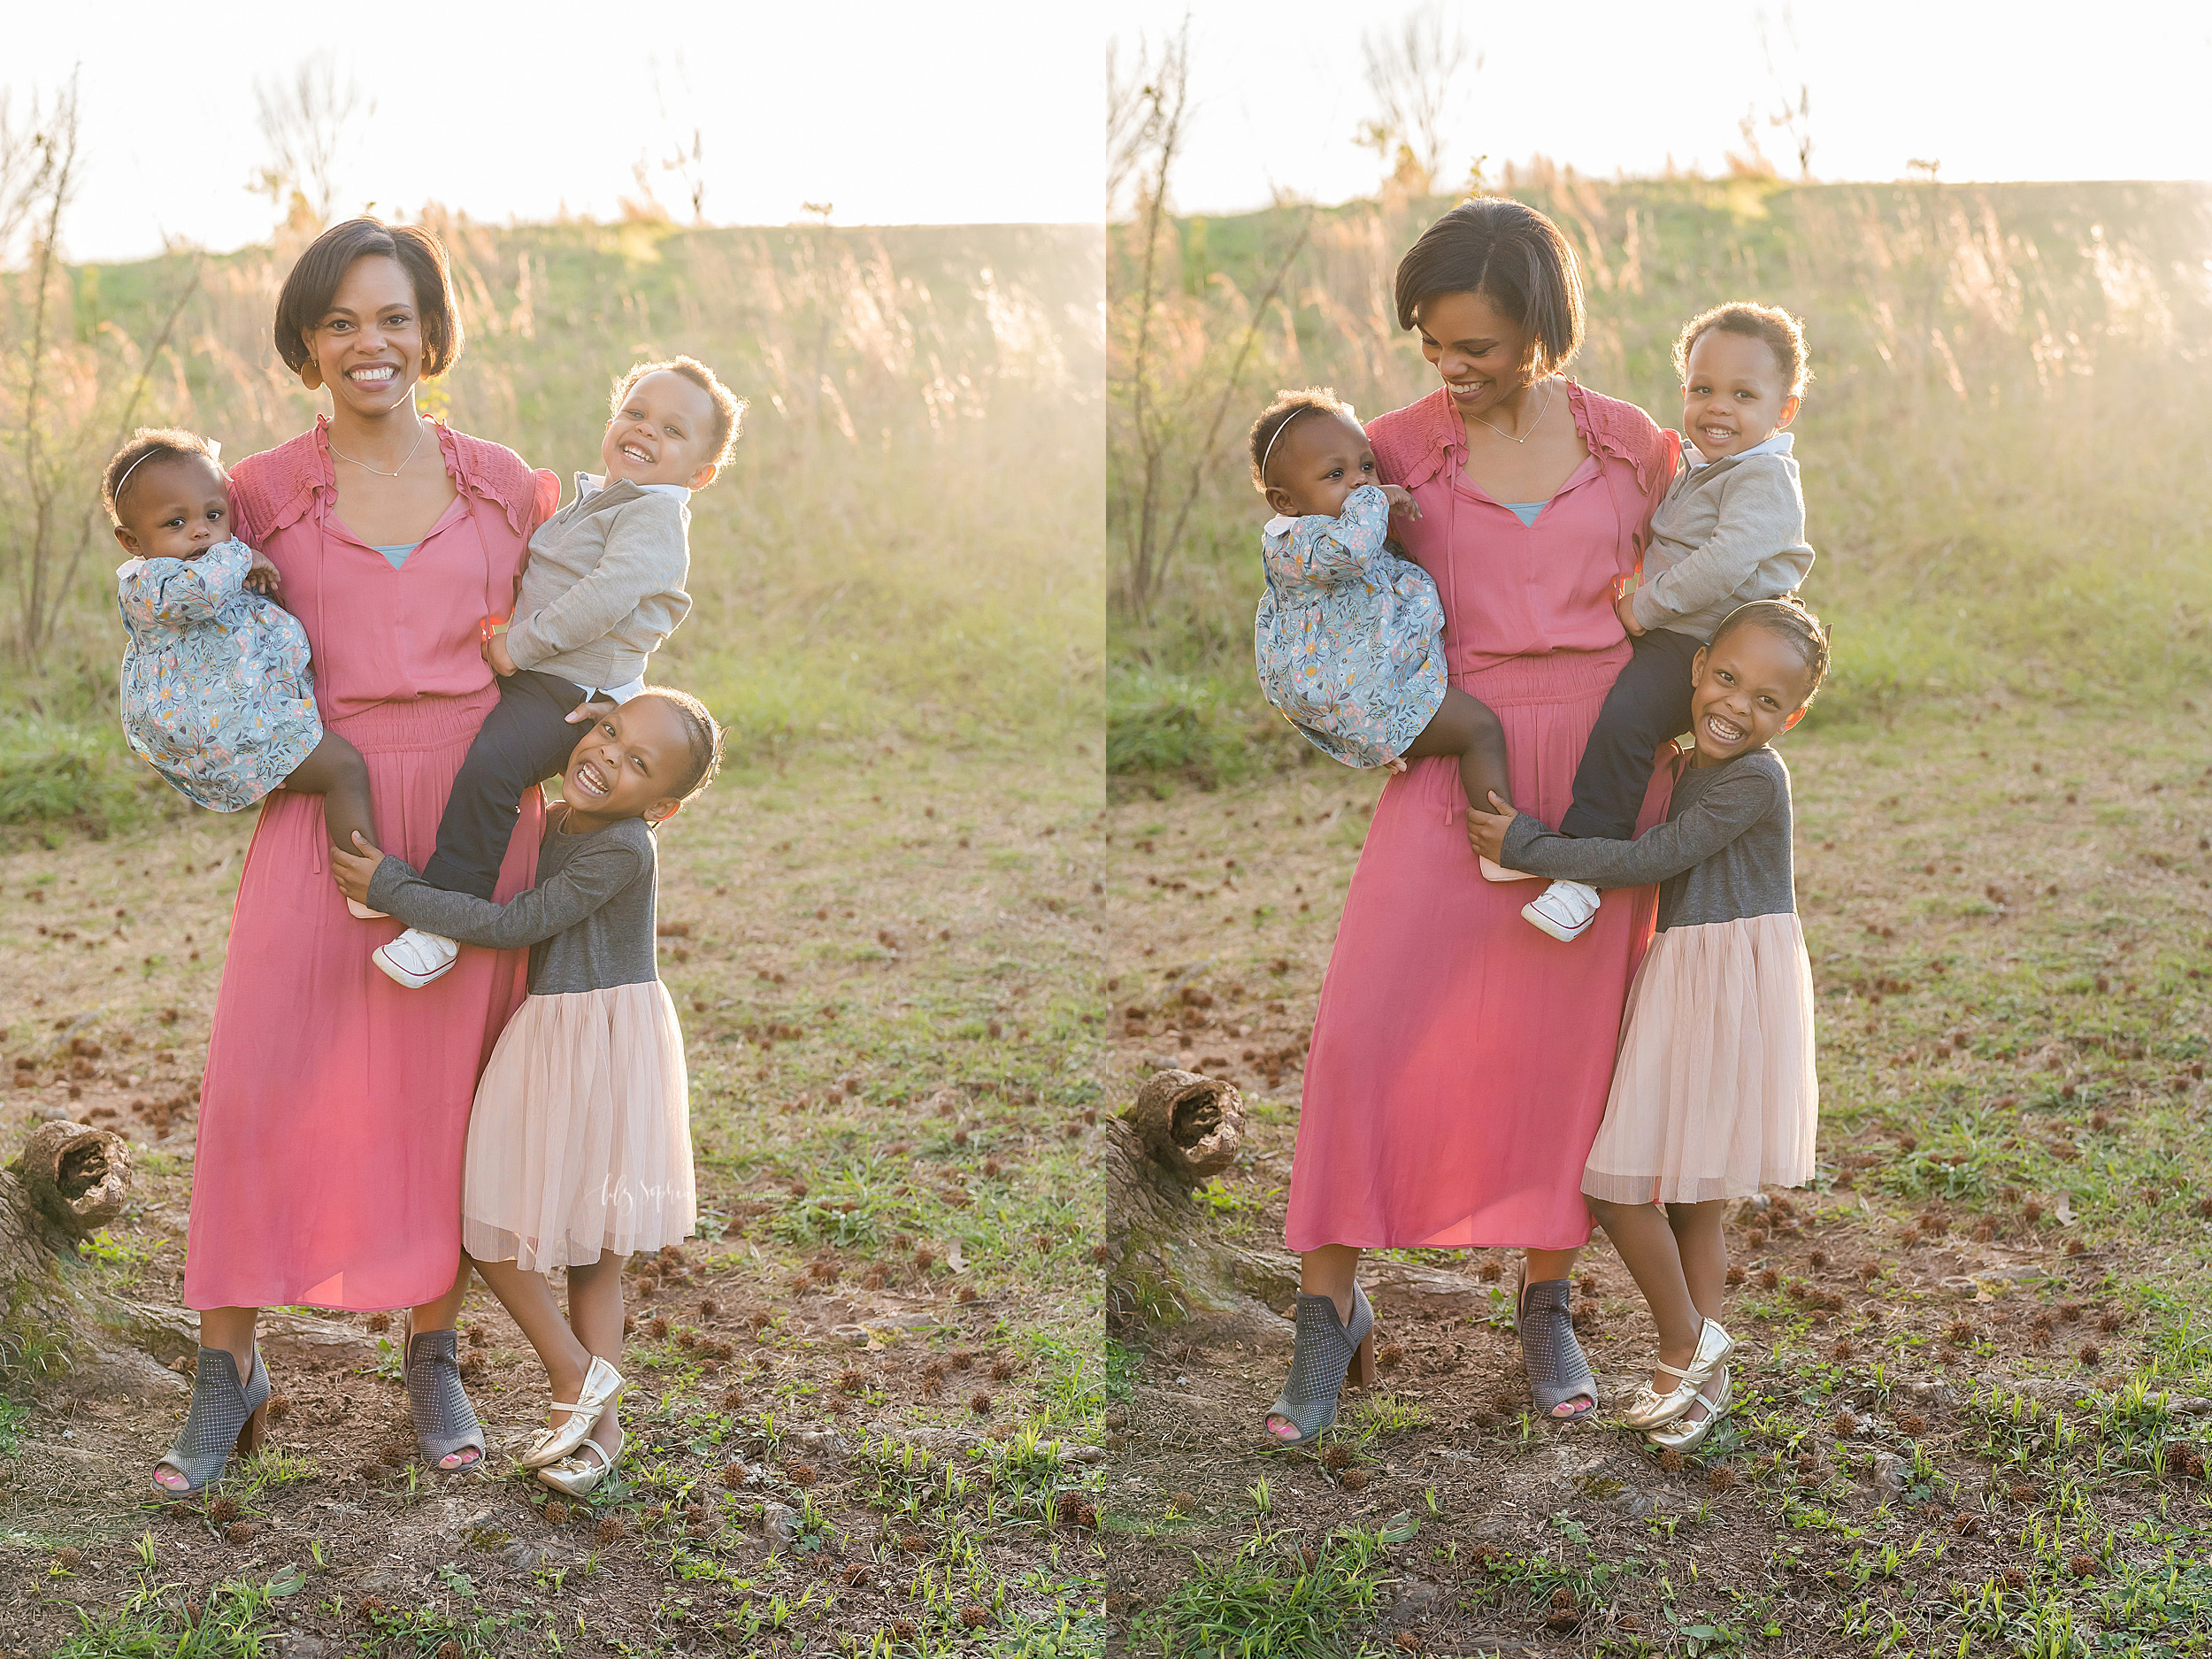 atlanta-cumming-milton-sandy-springs-buckhead-virginia-highlands-west-end-decatur-lily-sophia-photography-outdoor-sunset-field-first-birthday-cake-pop-smash-family-pictures_1289.jpg